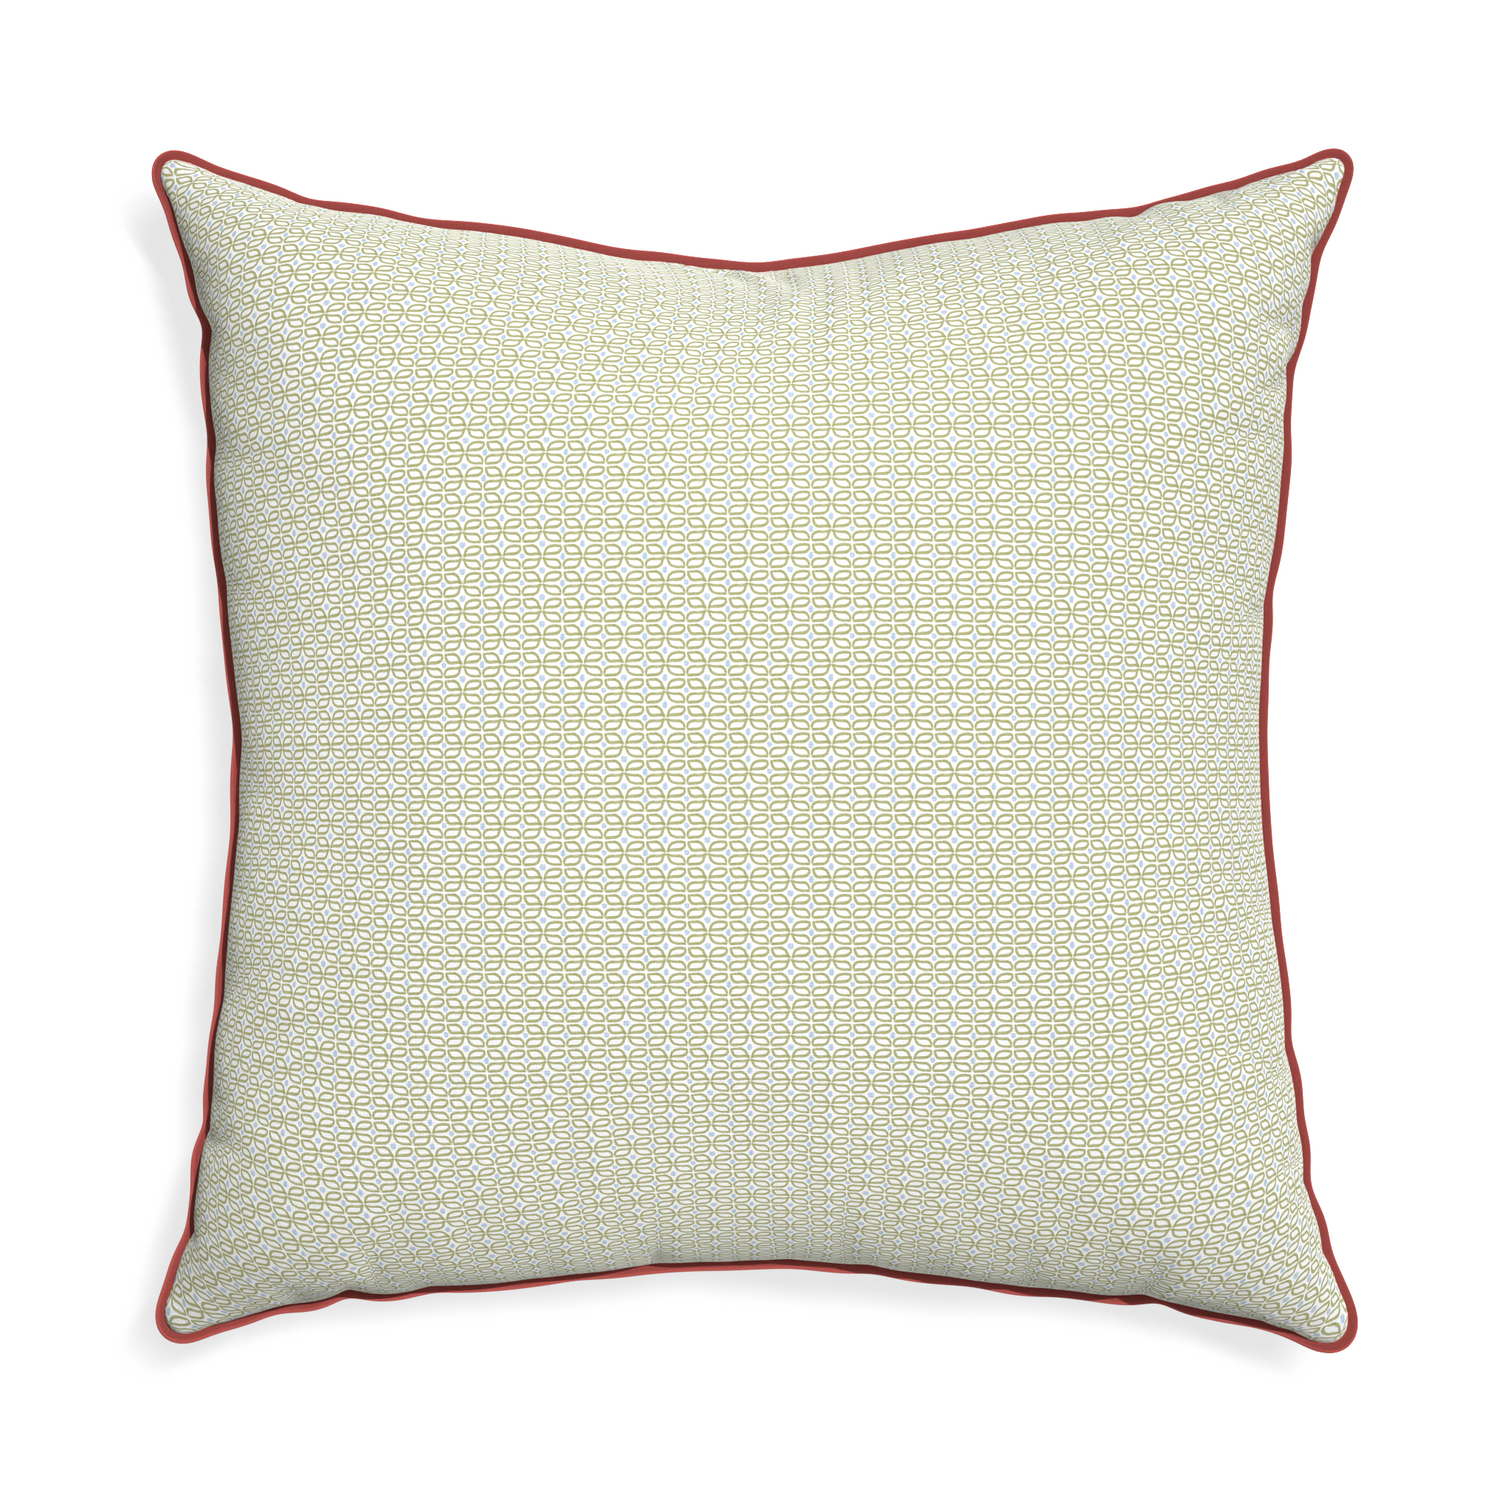 Euro-sham loomi moss custom pillow with c piping on white background